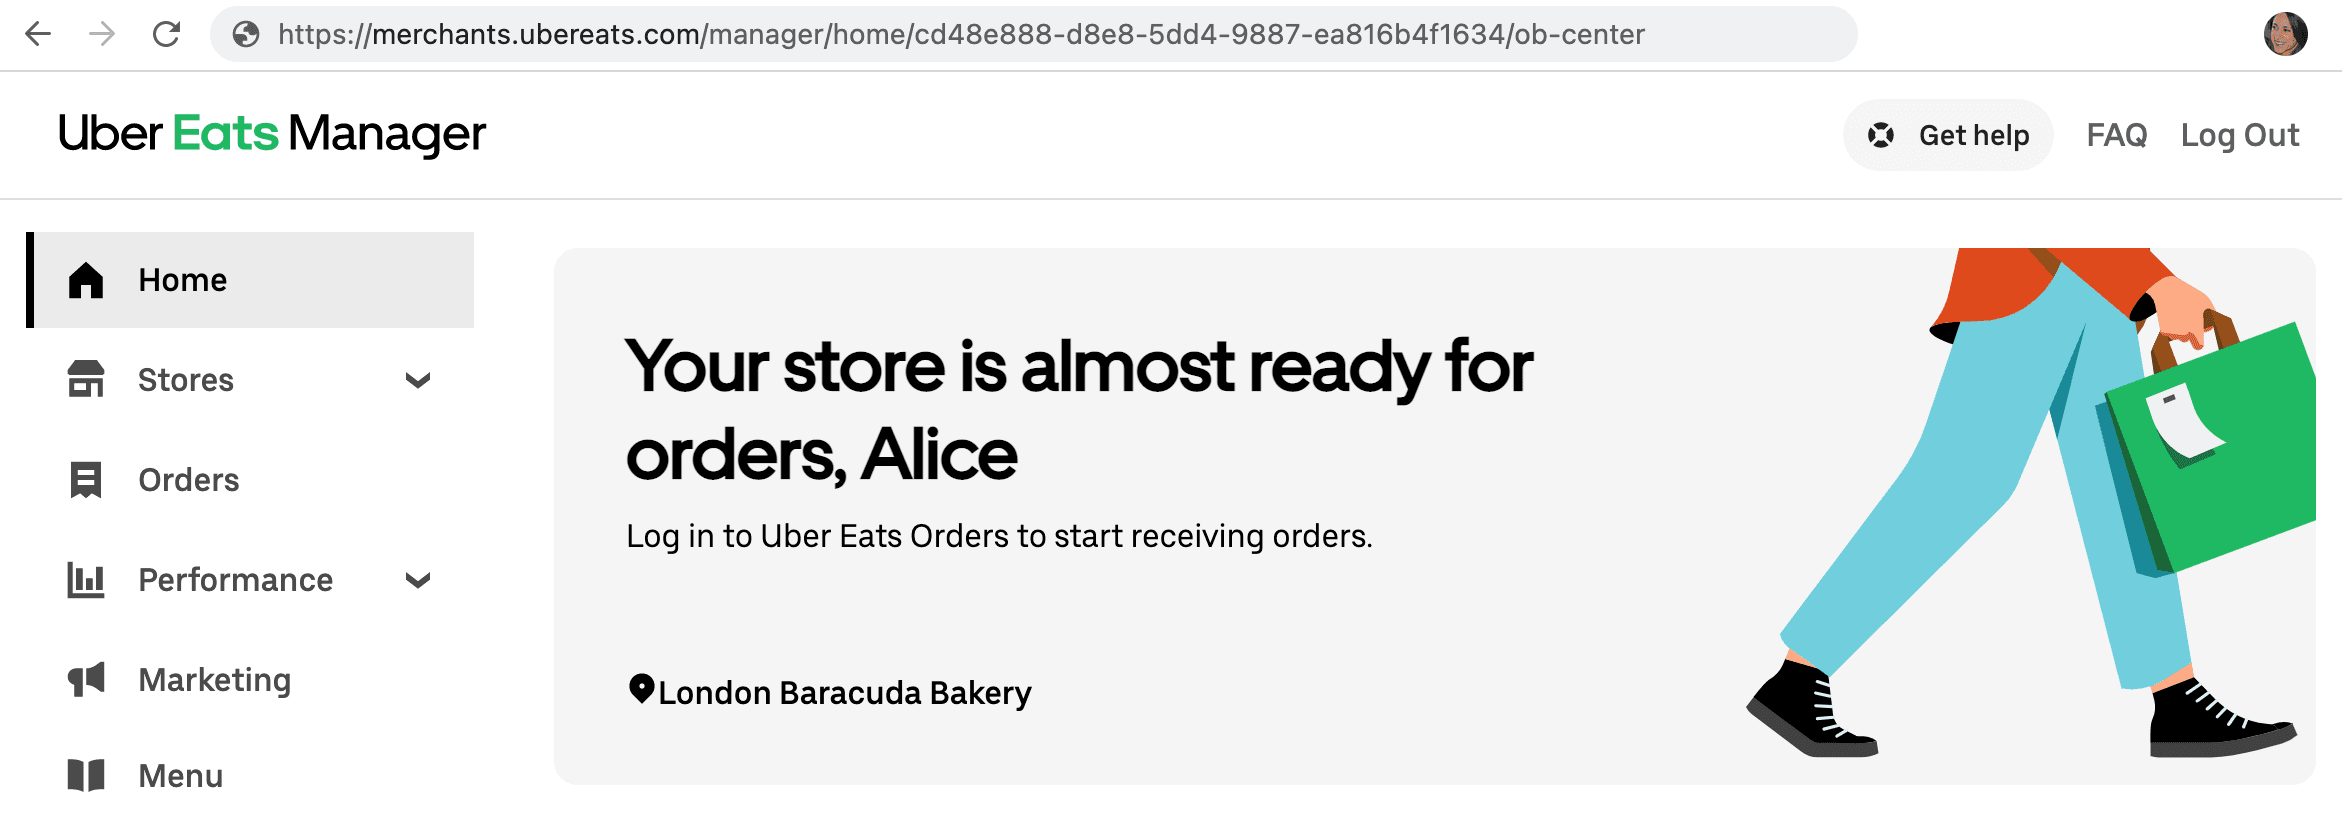 Uber Eats UUID in the URL of the Uber Eats back office